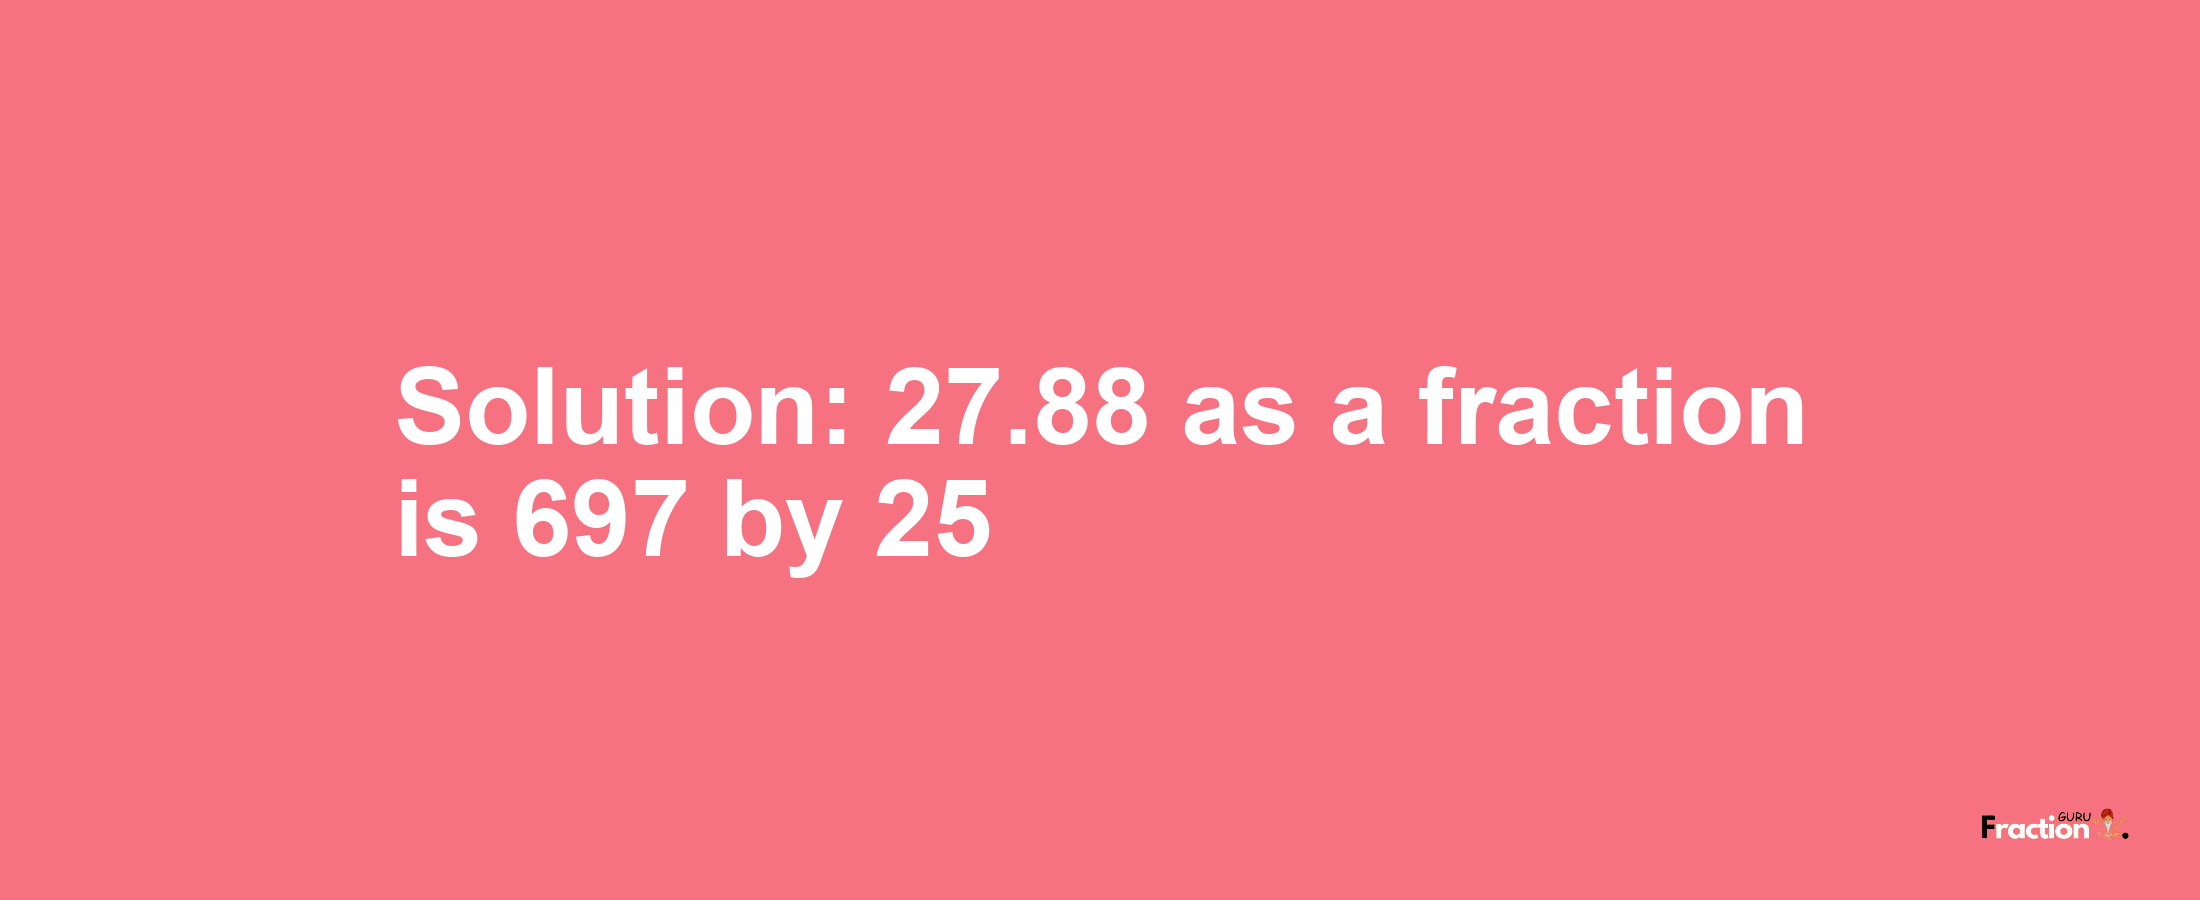 Solution:27.88 as a fraction is 697/25